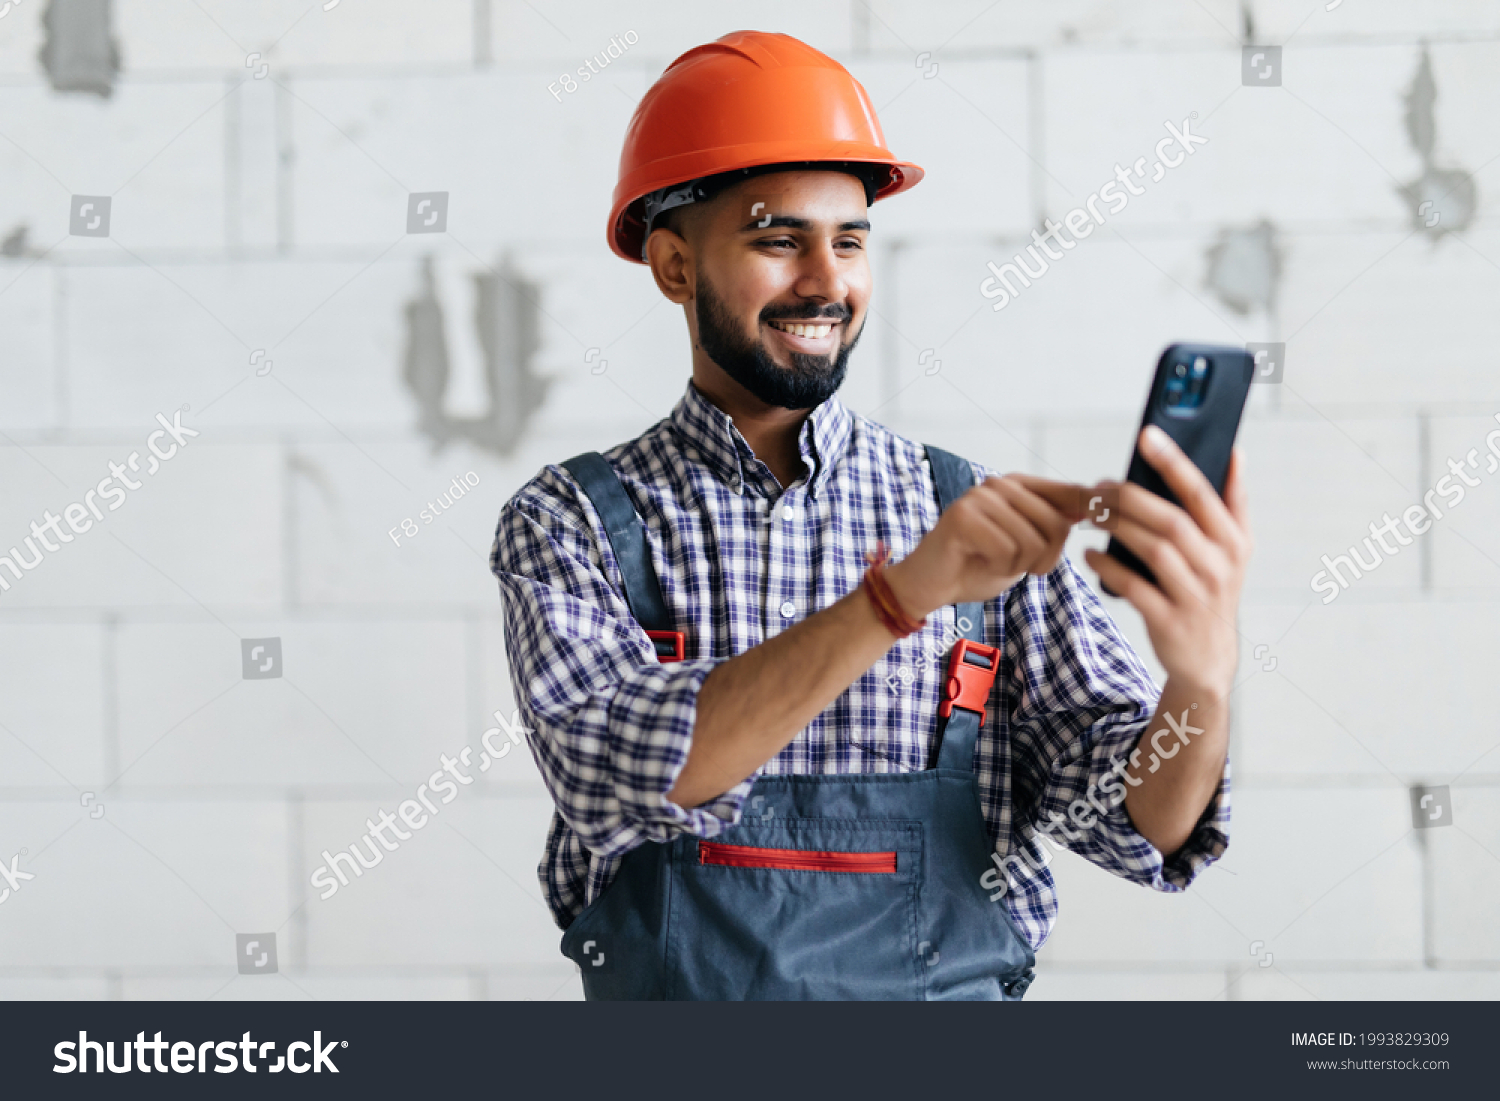 Indian builder checking a message on his mobile phone or making a call in a new build house #1993829309